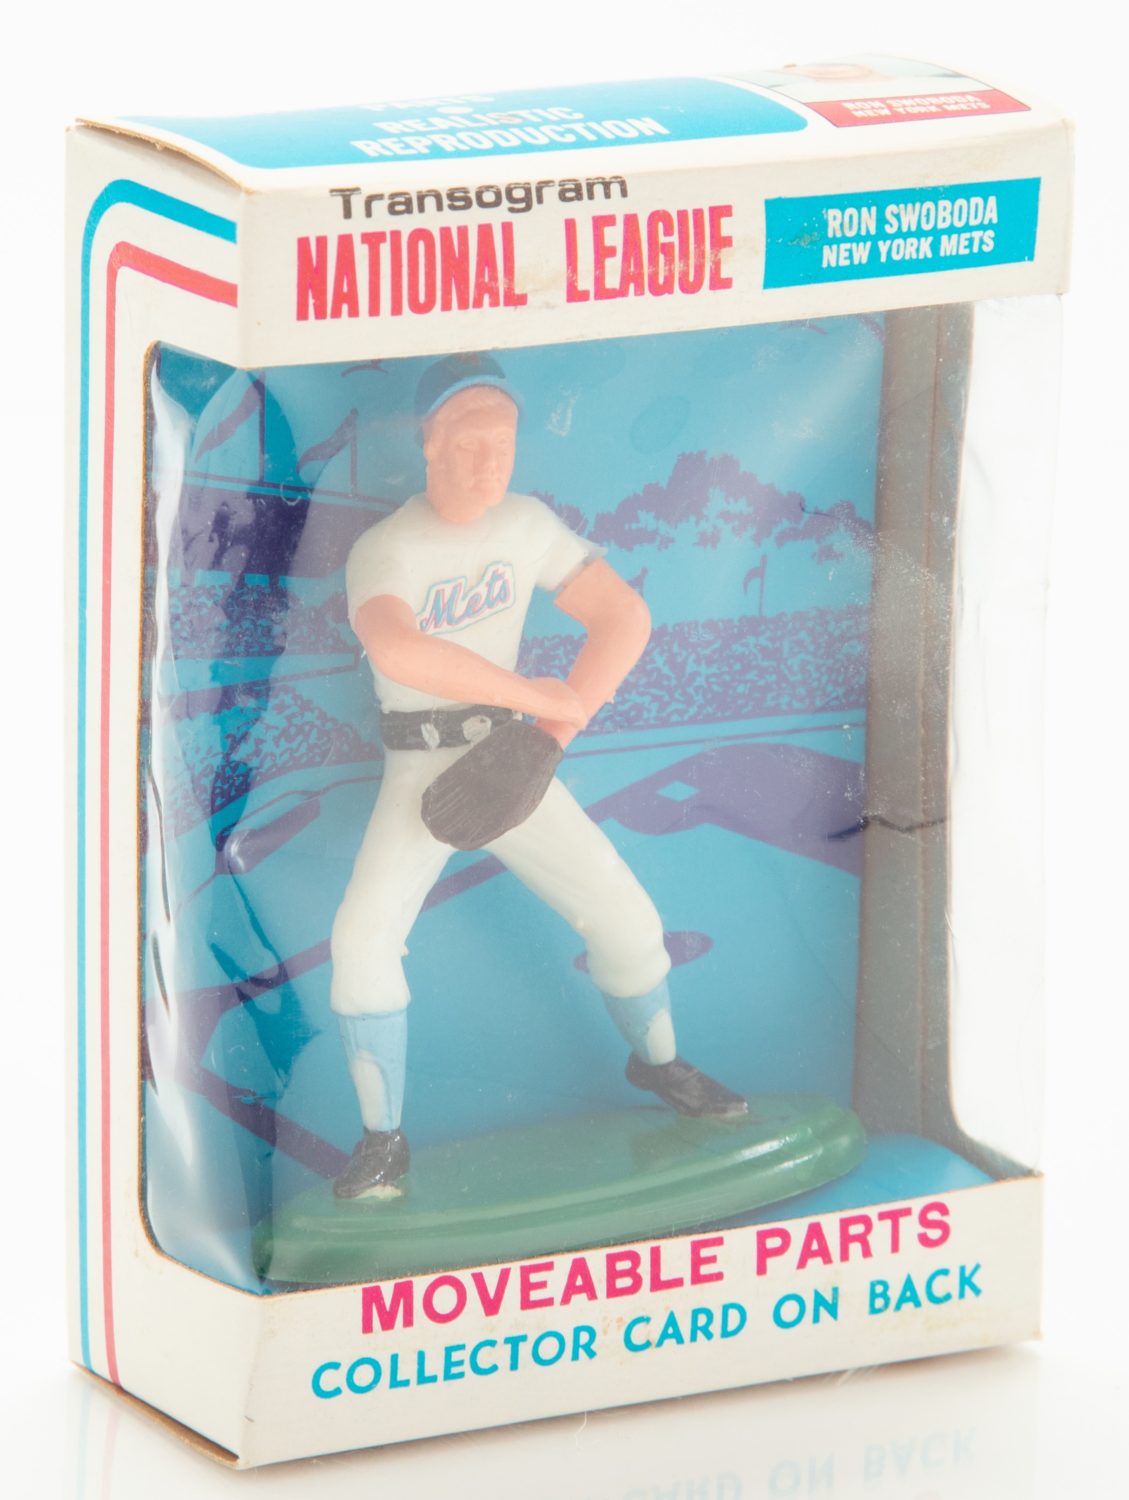 1969 Ron Swoboda Toy and Card